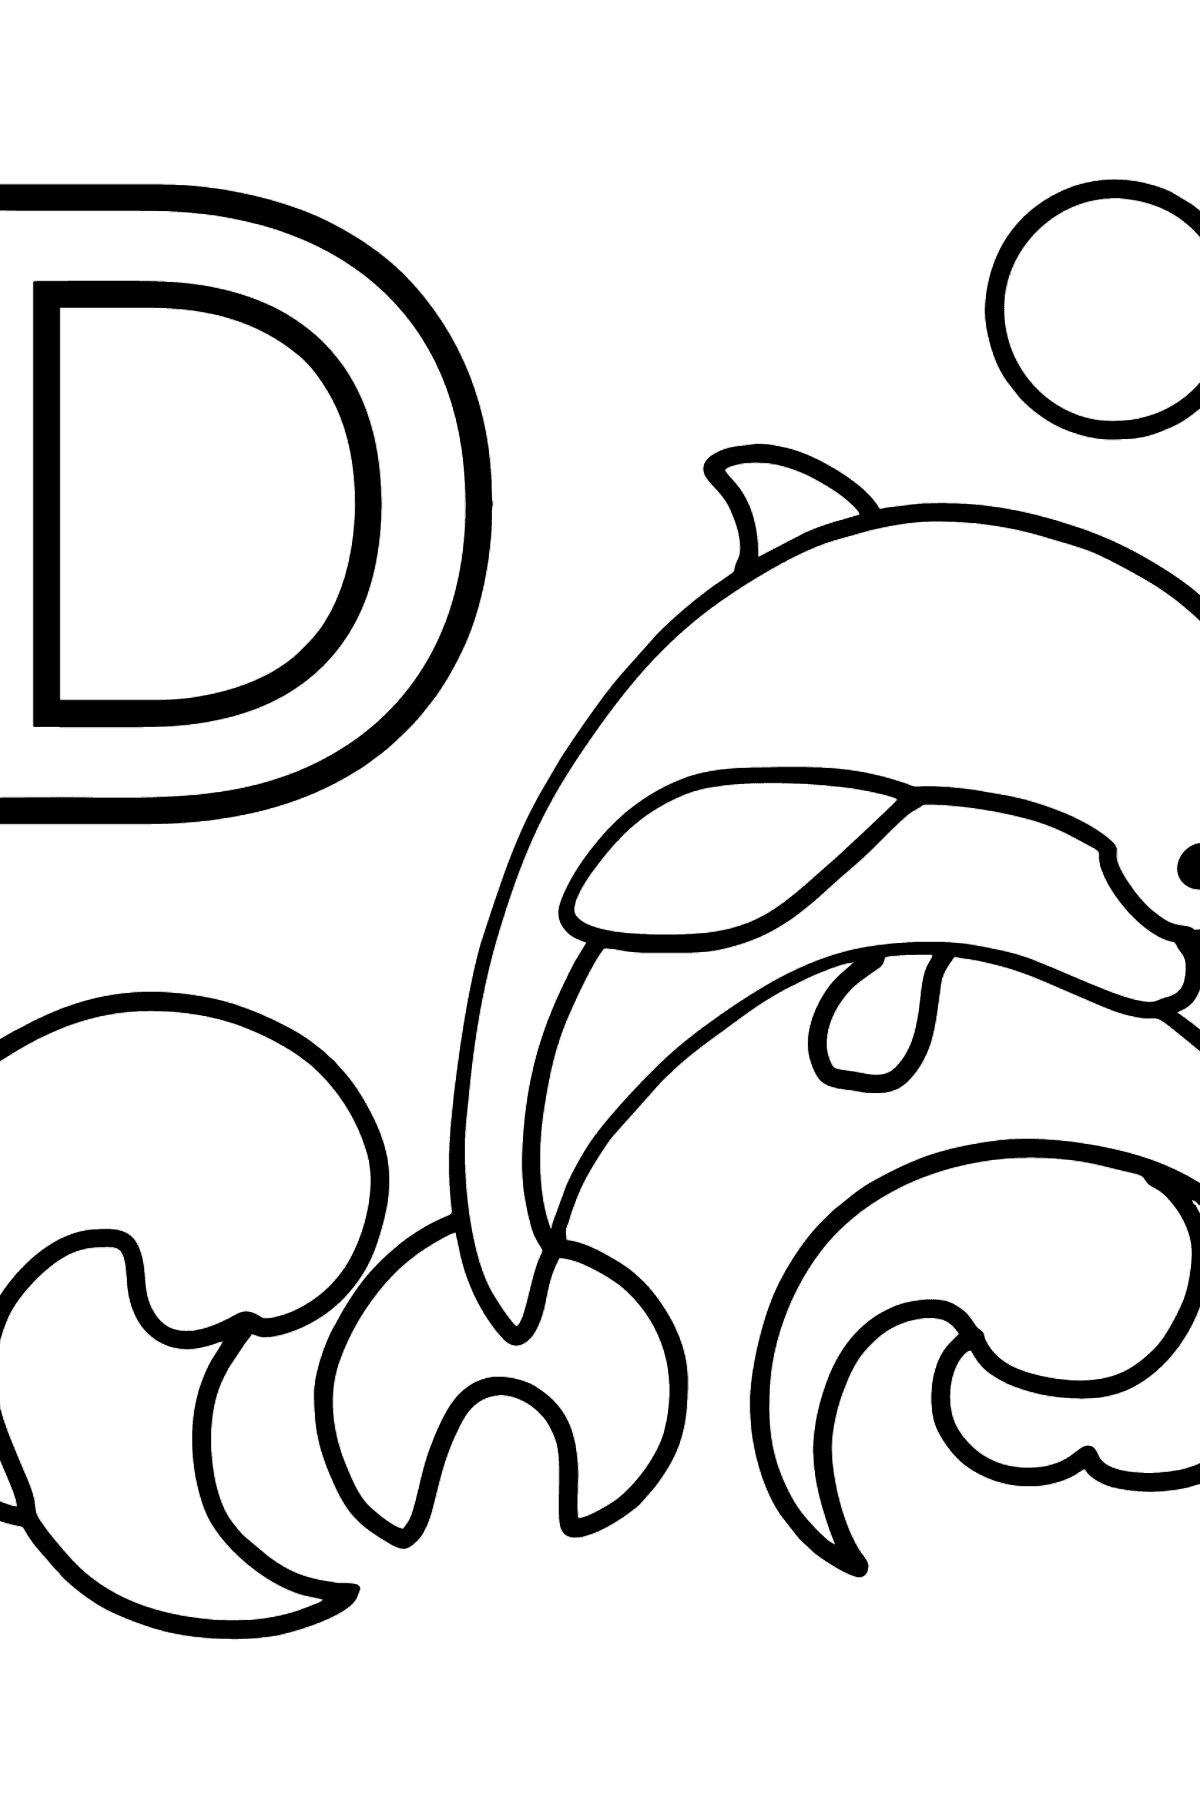 English letter d coloring pages â free online